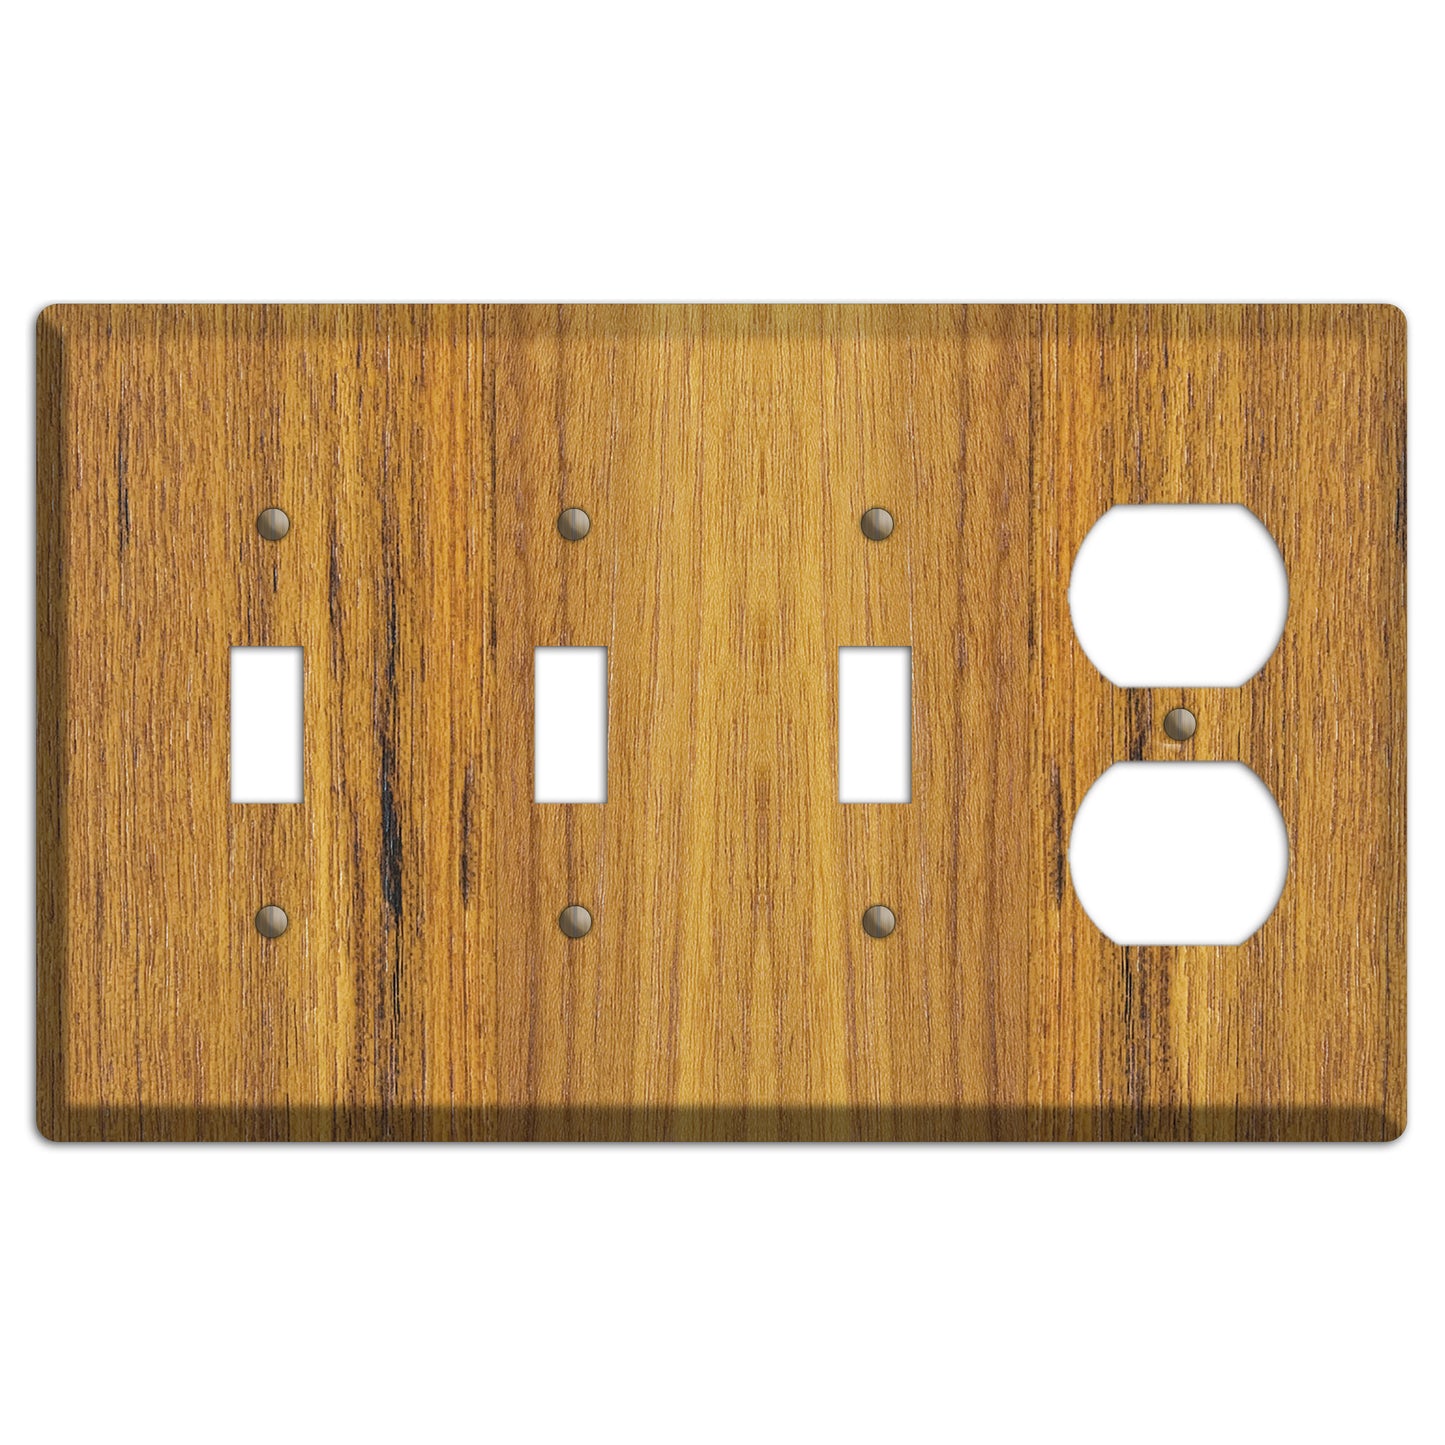 Teak Wood 3 Toggle / Duplex Outlet Cover Plate